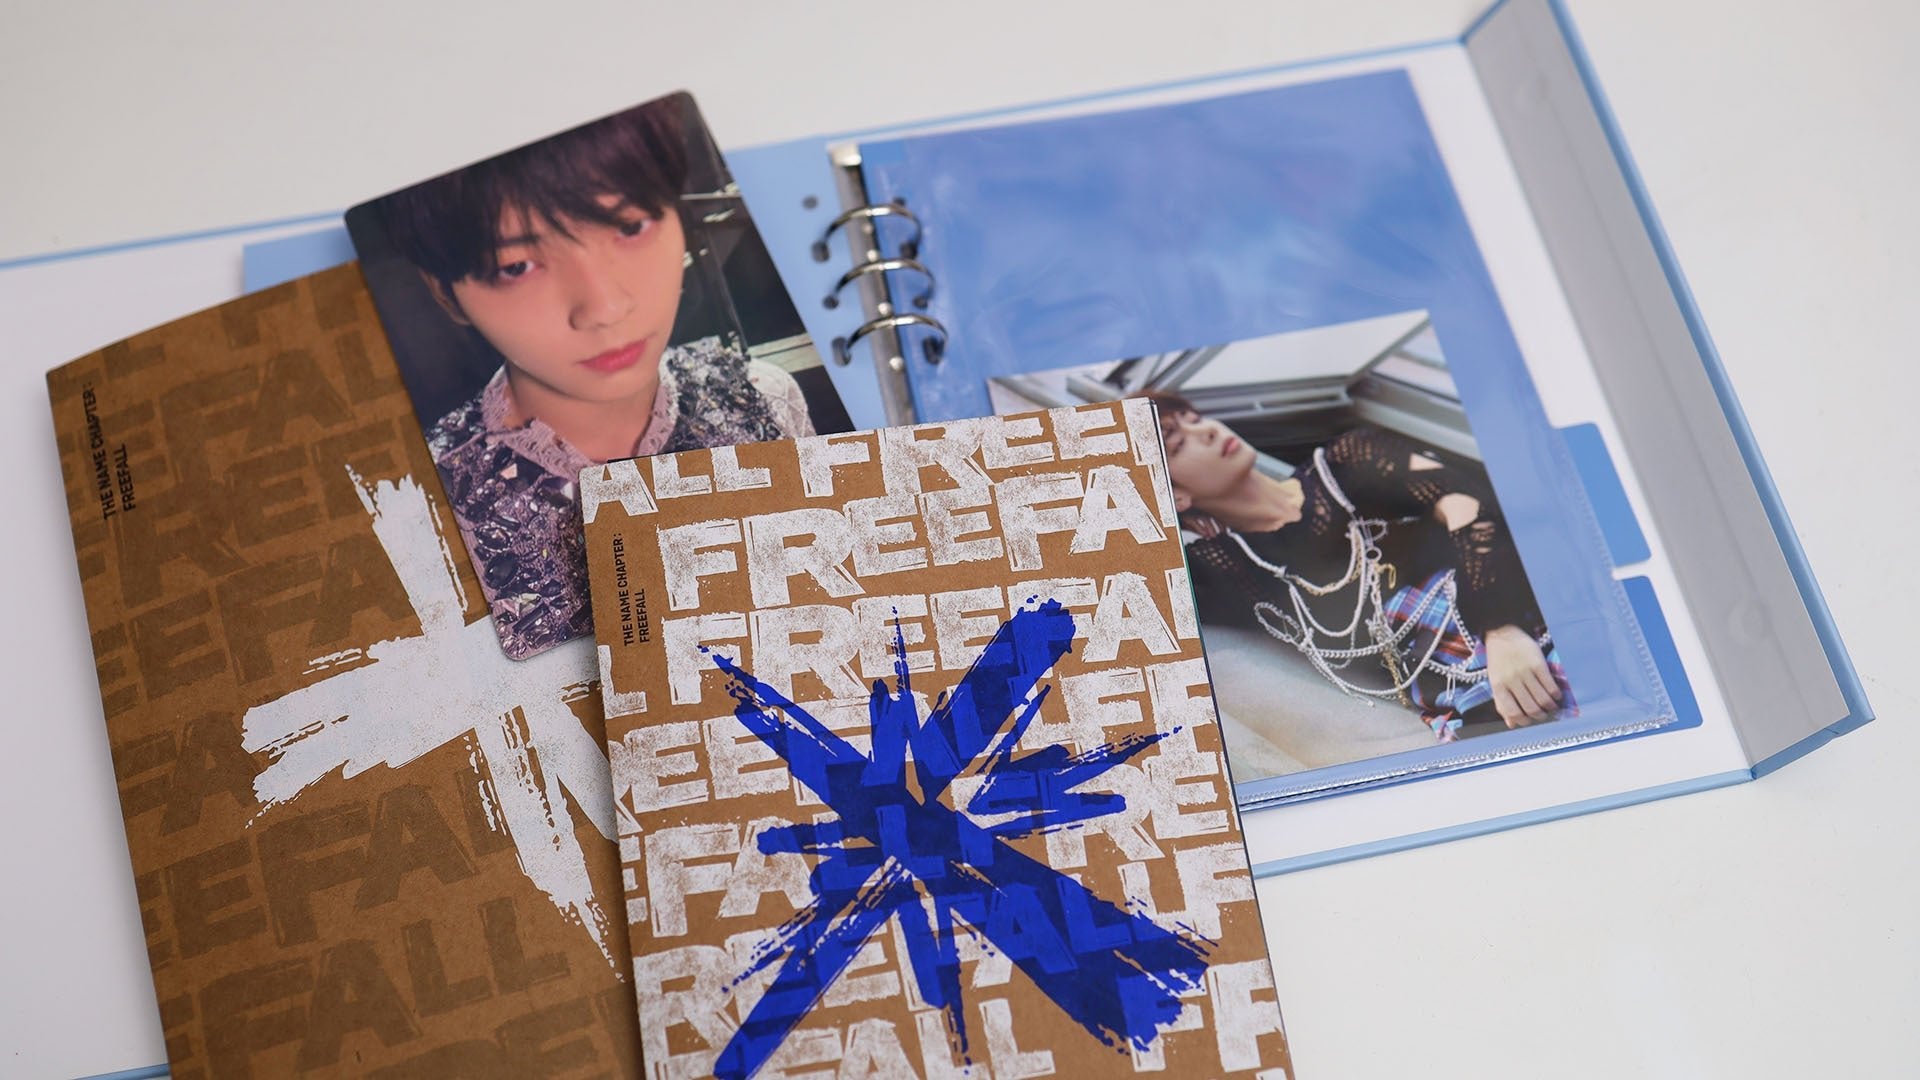 Organising TXT (Tomorrow X Together) 3rd Full Album ‘The Name Chapter: FREEFALL’ - Prism Platinum